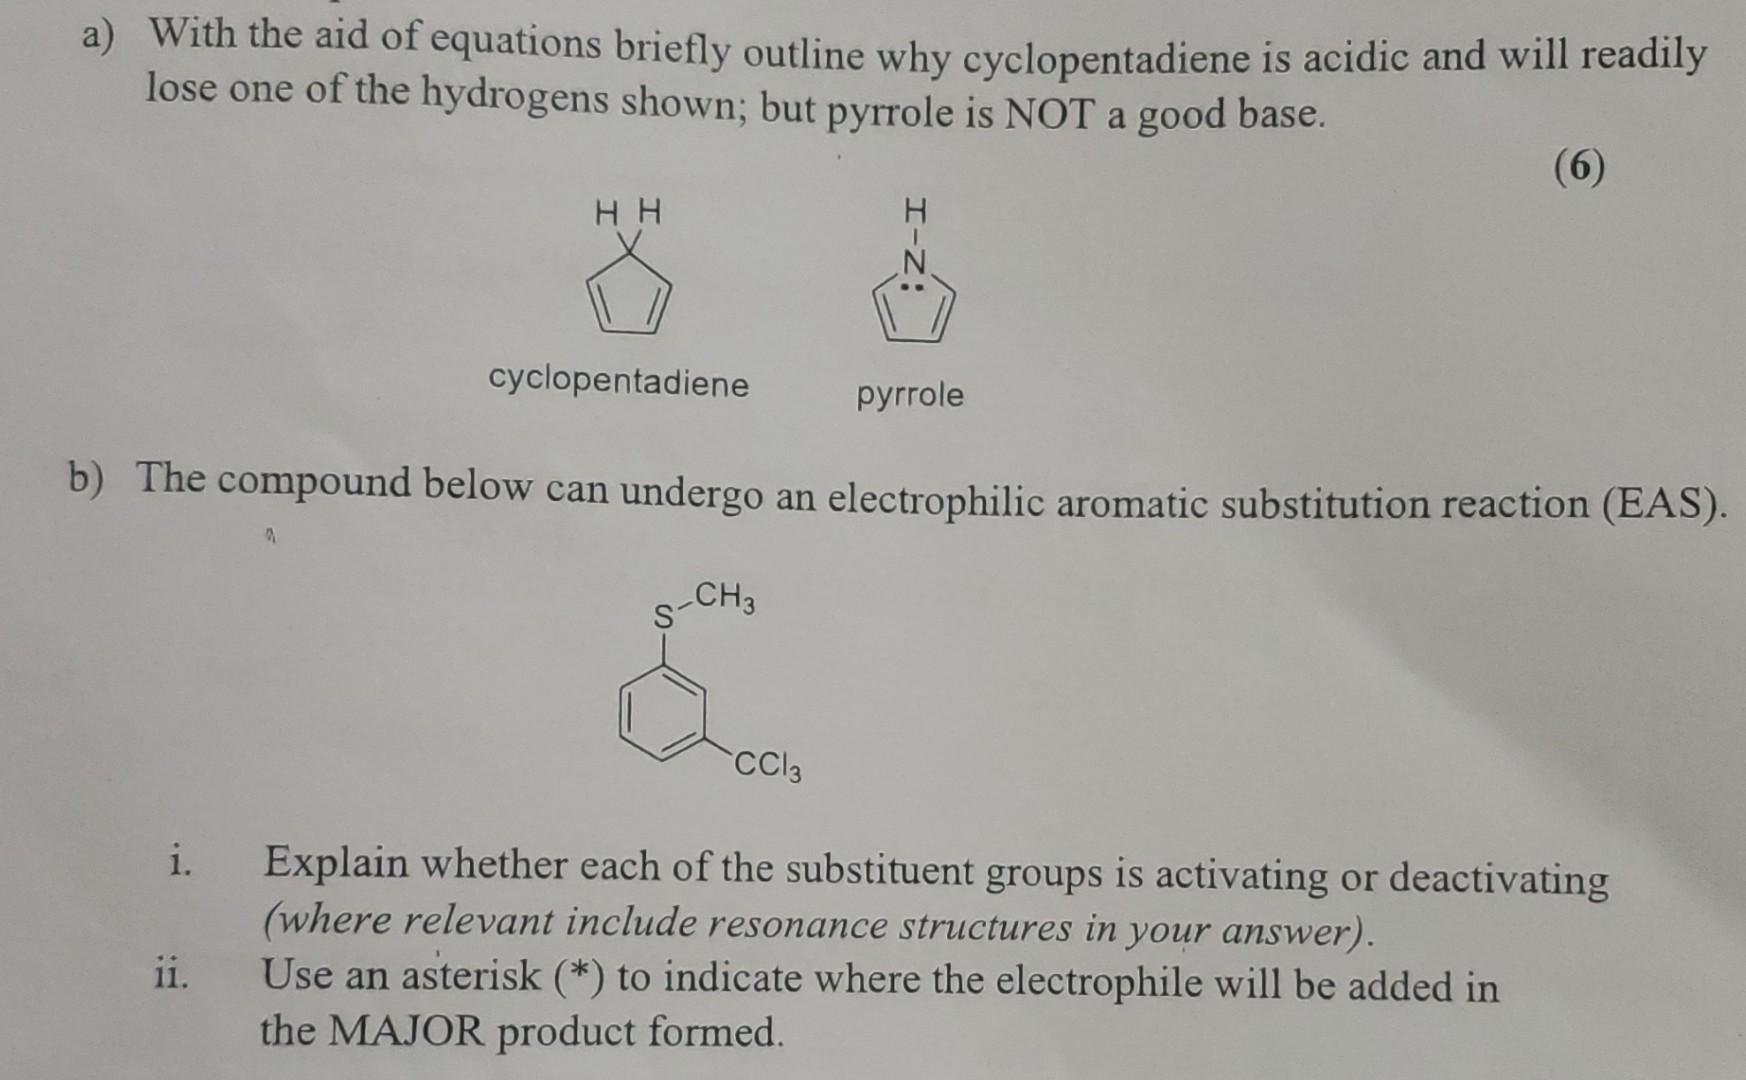 a) With the aid of equations briefly outline why cyclopentadiene is acidic and will readily lose one of the